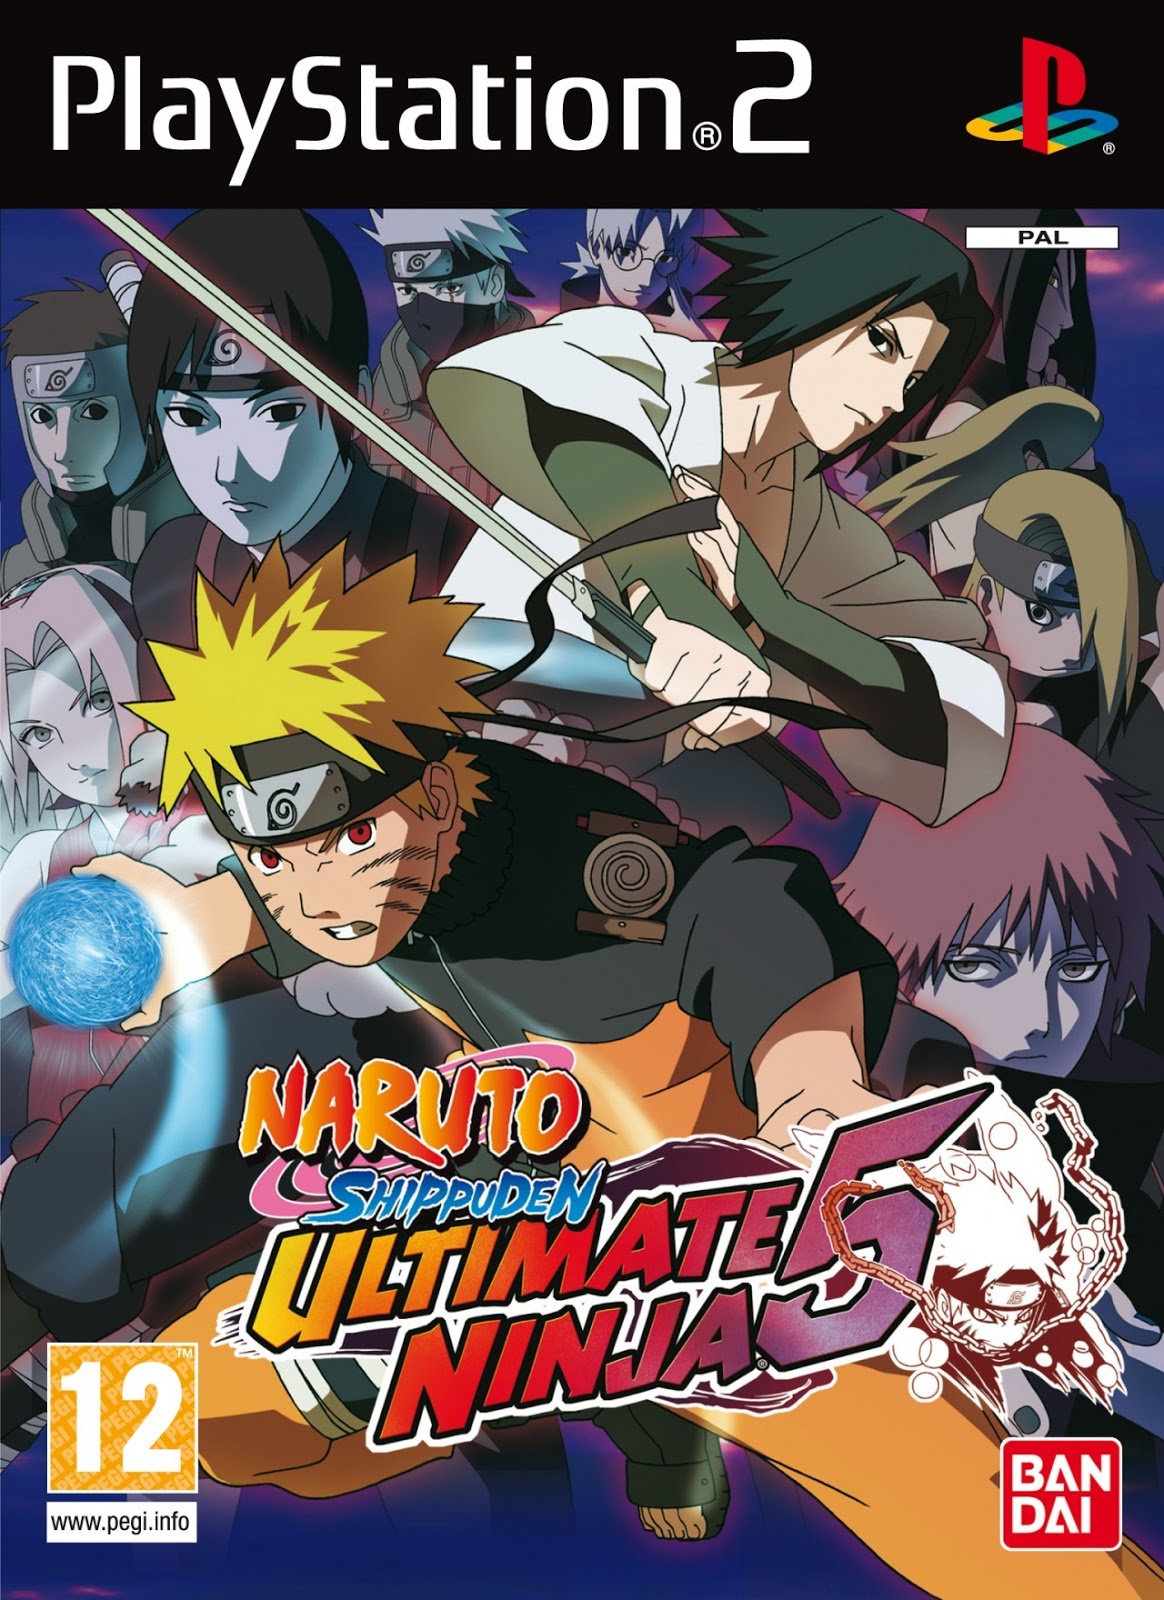 download save data naruto the hokage ppsspp